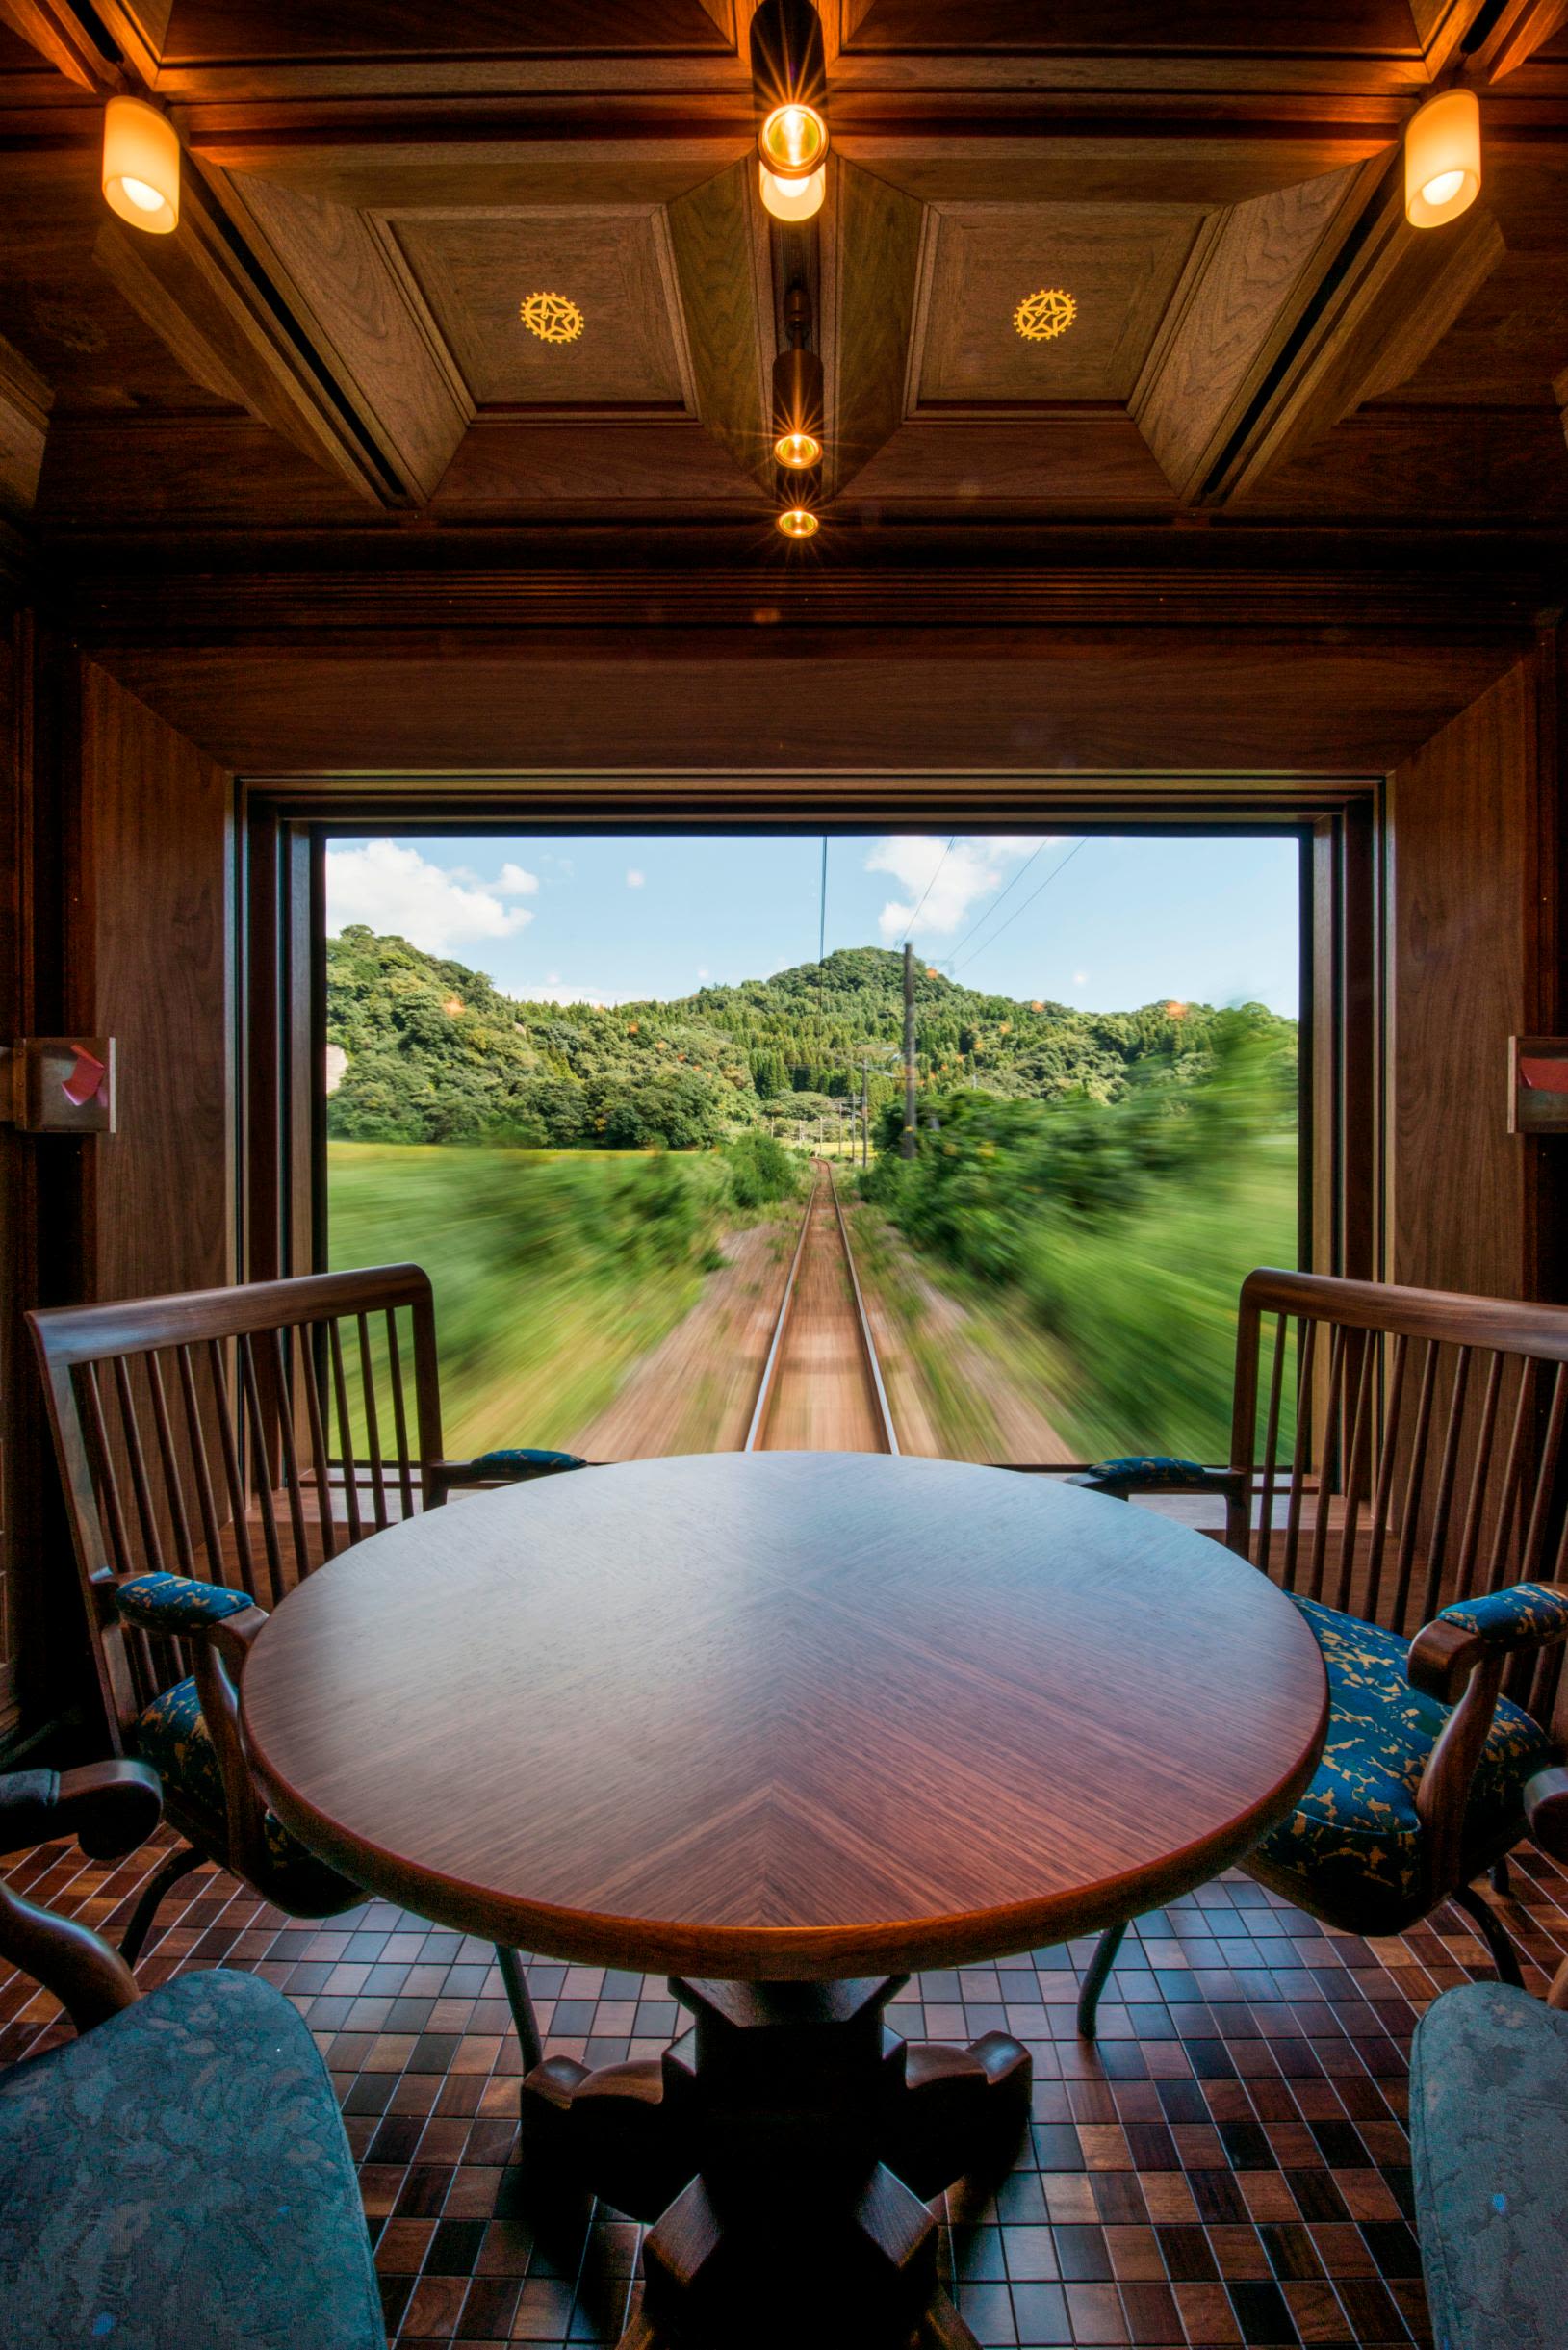 Seven Stars train: Japan's answer to Orient Express